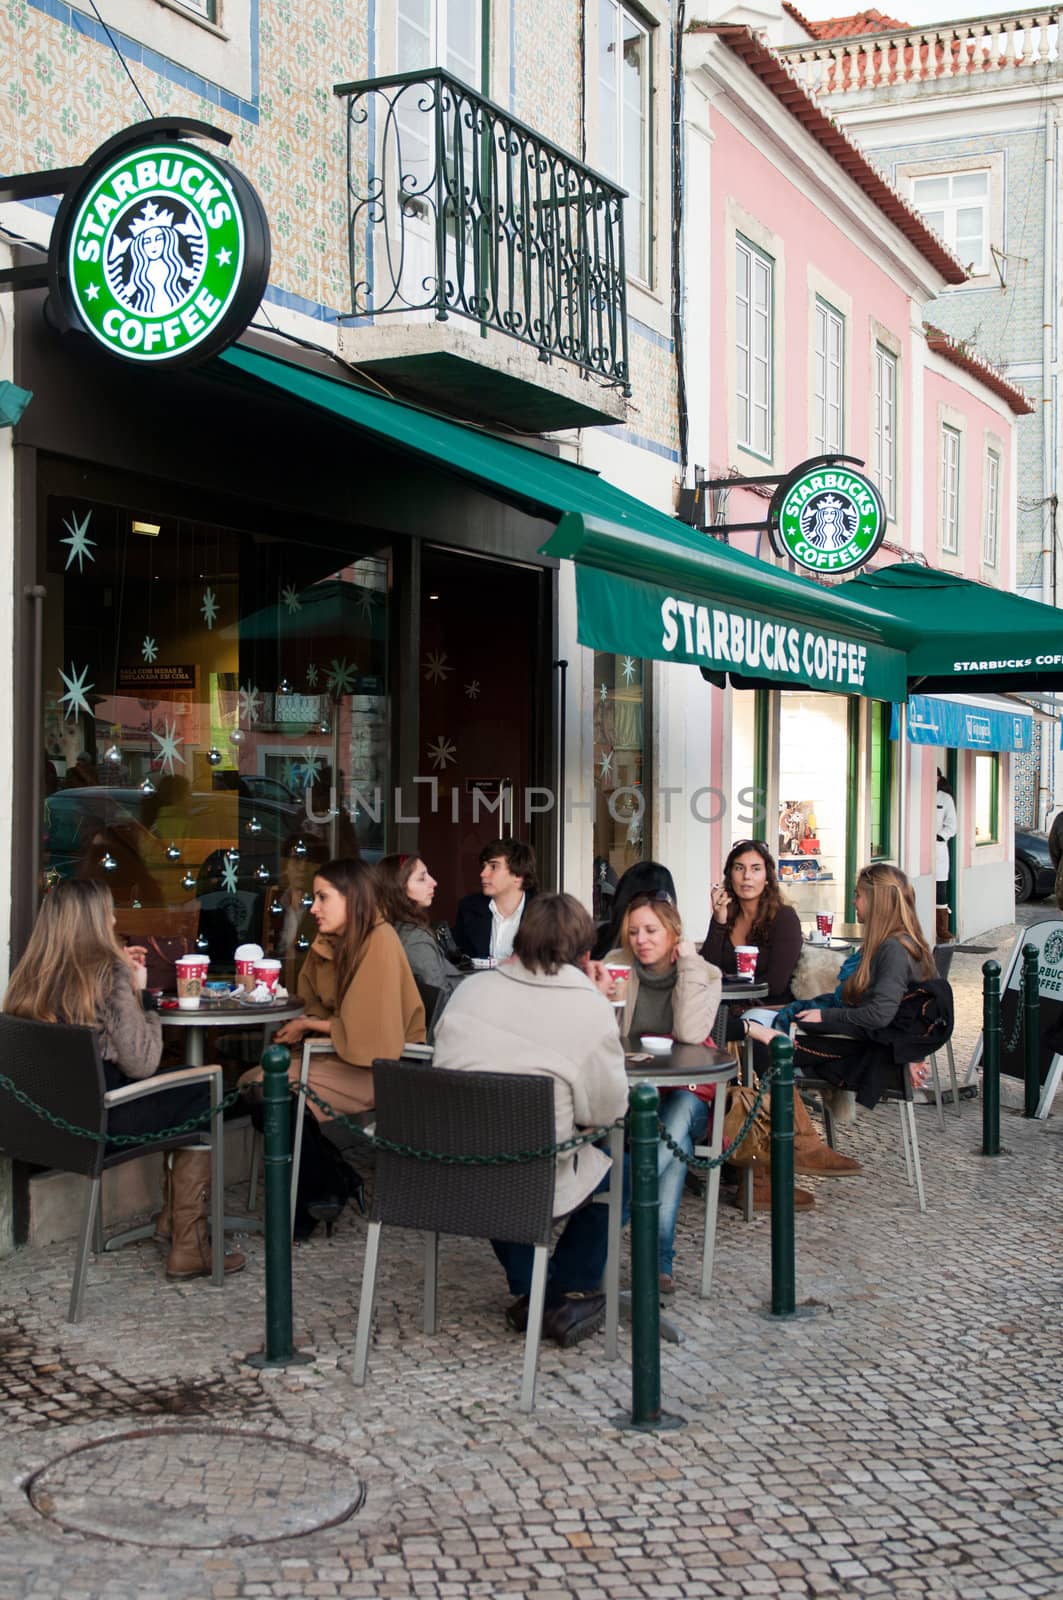 LISBON, PORTUGAL - DECEMBER 19: people having a break at Starbucks coffee esplanade on December 19, 2011 in Lisbon, Portugal. Starbucks is the largest coffeehouse company in the world with 18,887 stores